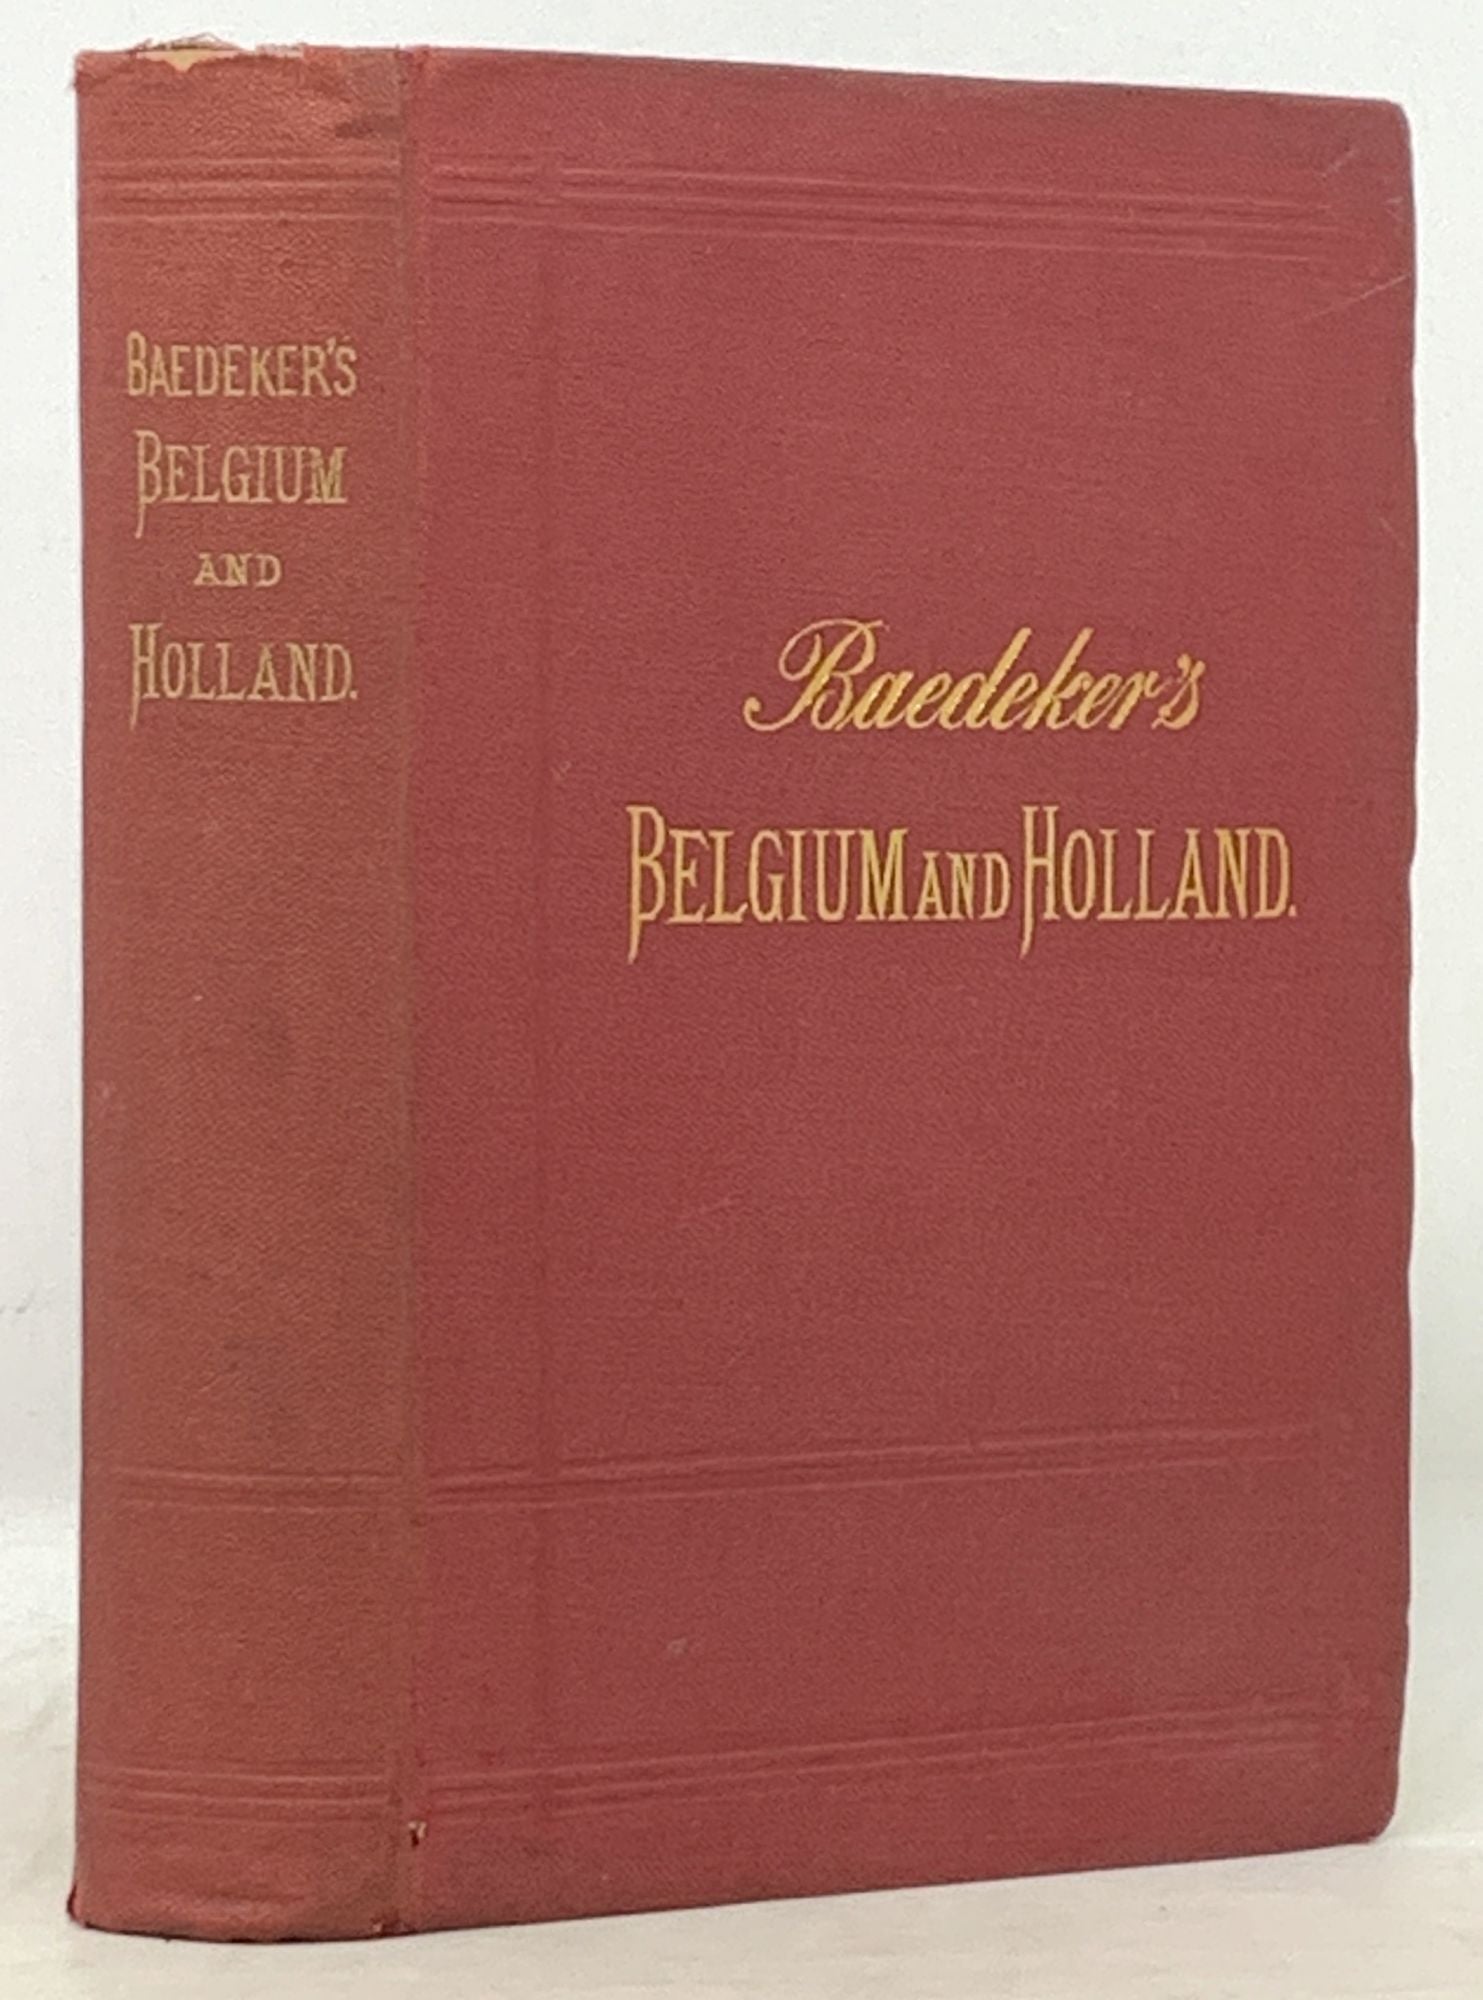 Baedeker, Karl - BELGIUM And HOLLAND Including the Grand-Duchy of Luxembourg. Handbook for Travellers